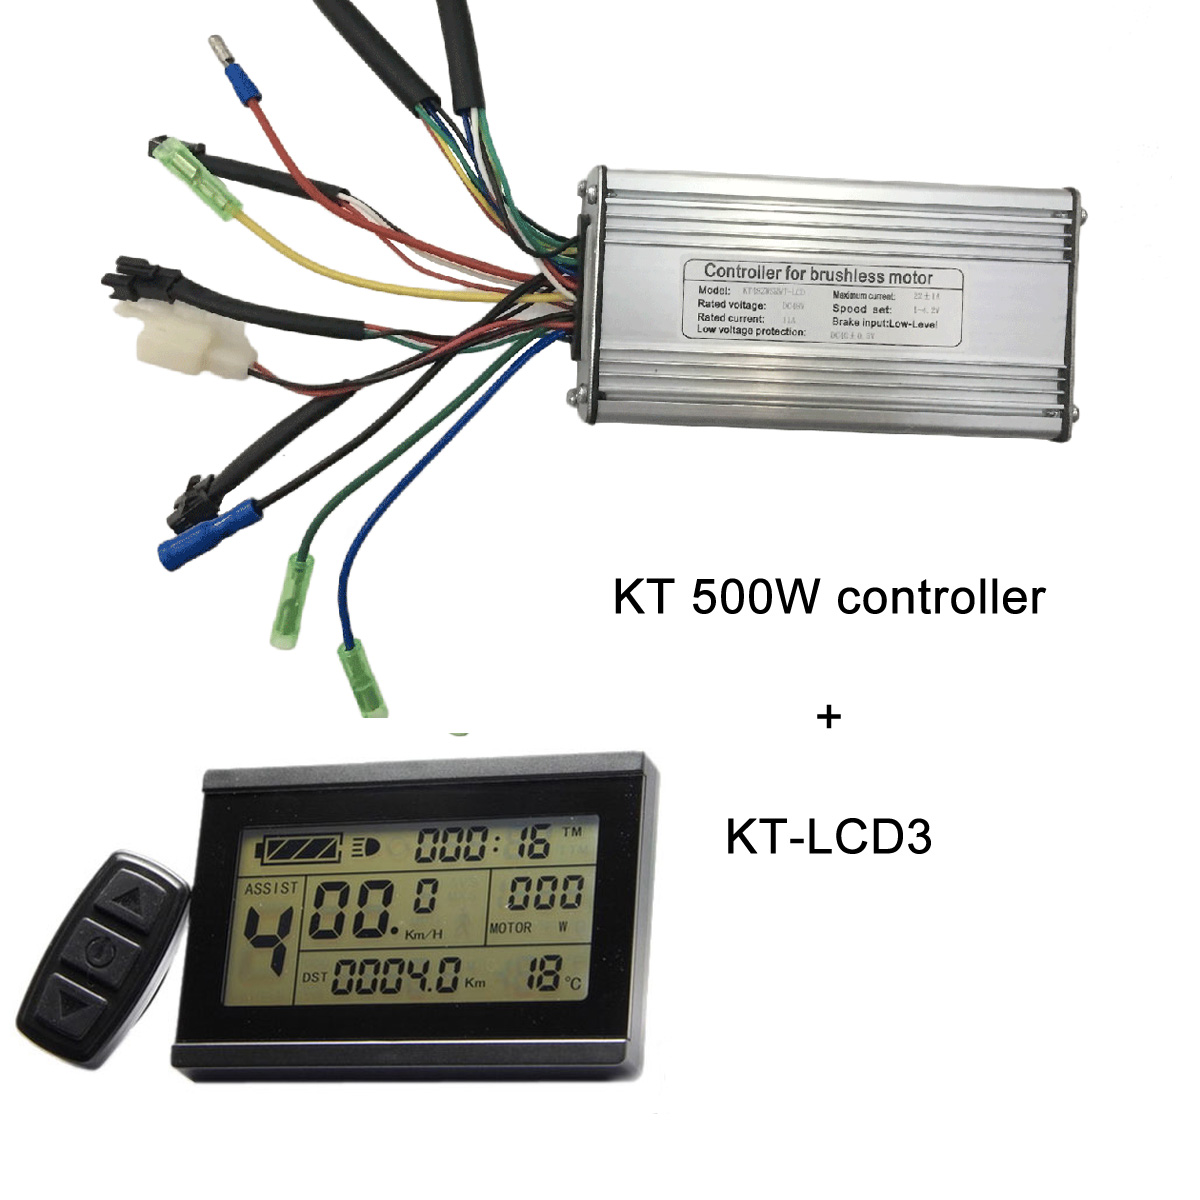 KT controllers wit KT-LCD3 electric bike display